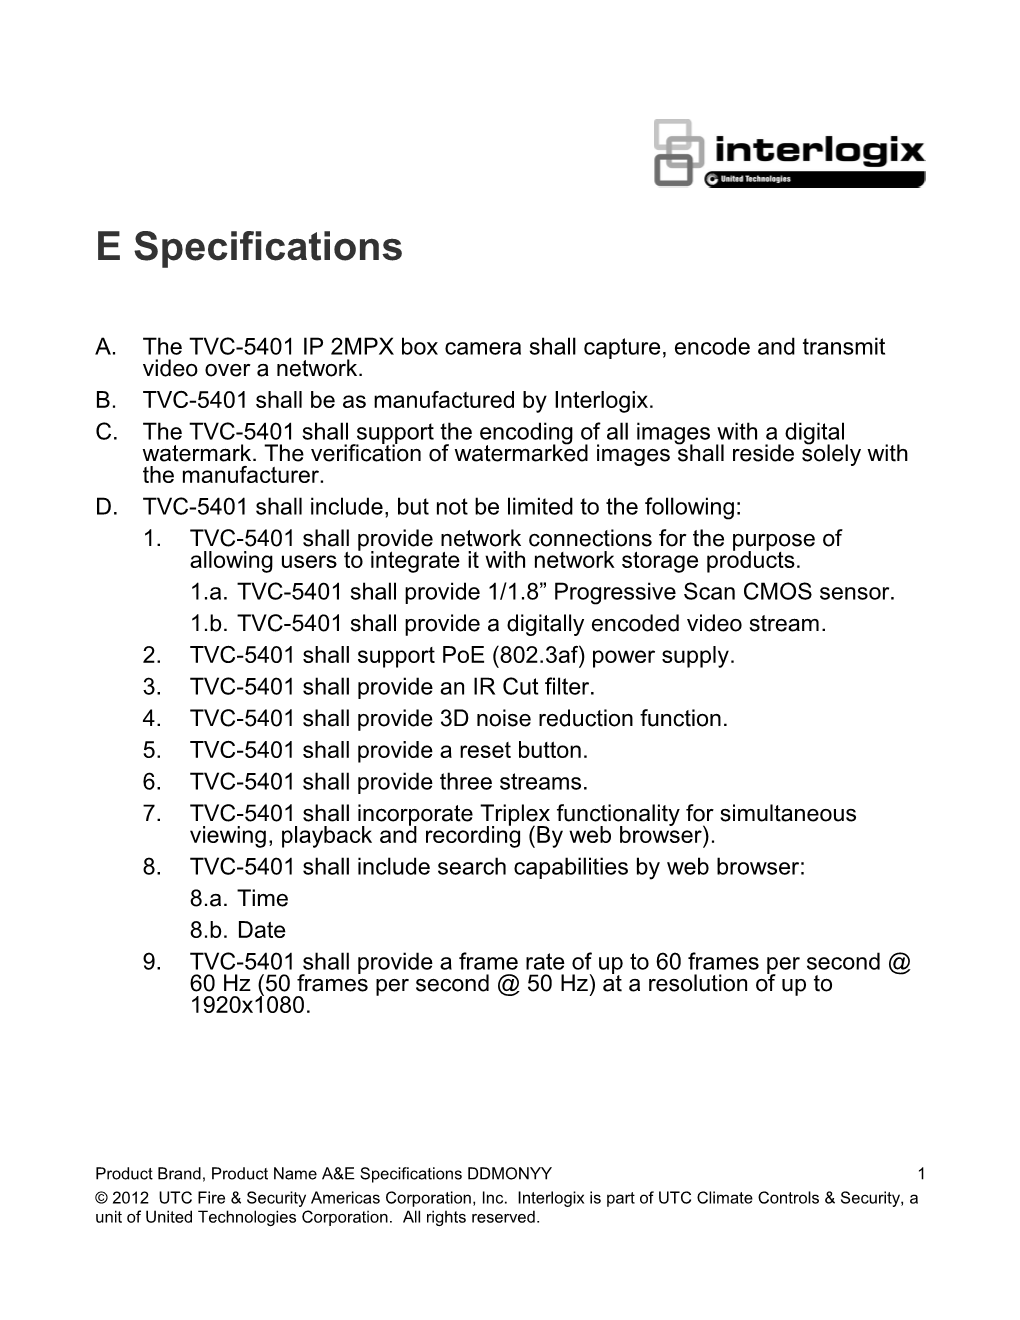 TVC-1201/TVC-3201 H.264 IP 1.3MPX Box Camera A&E Specifications